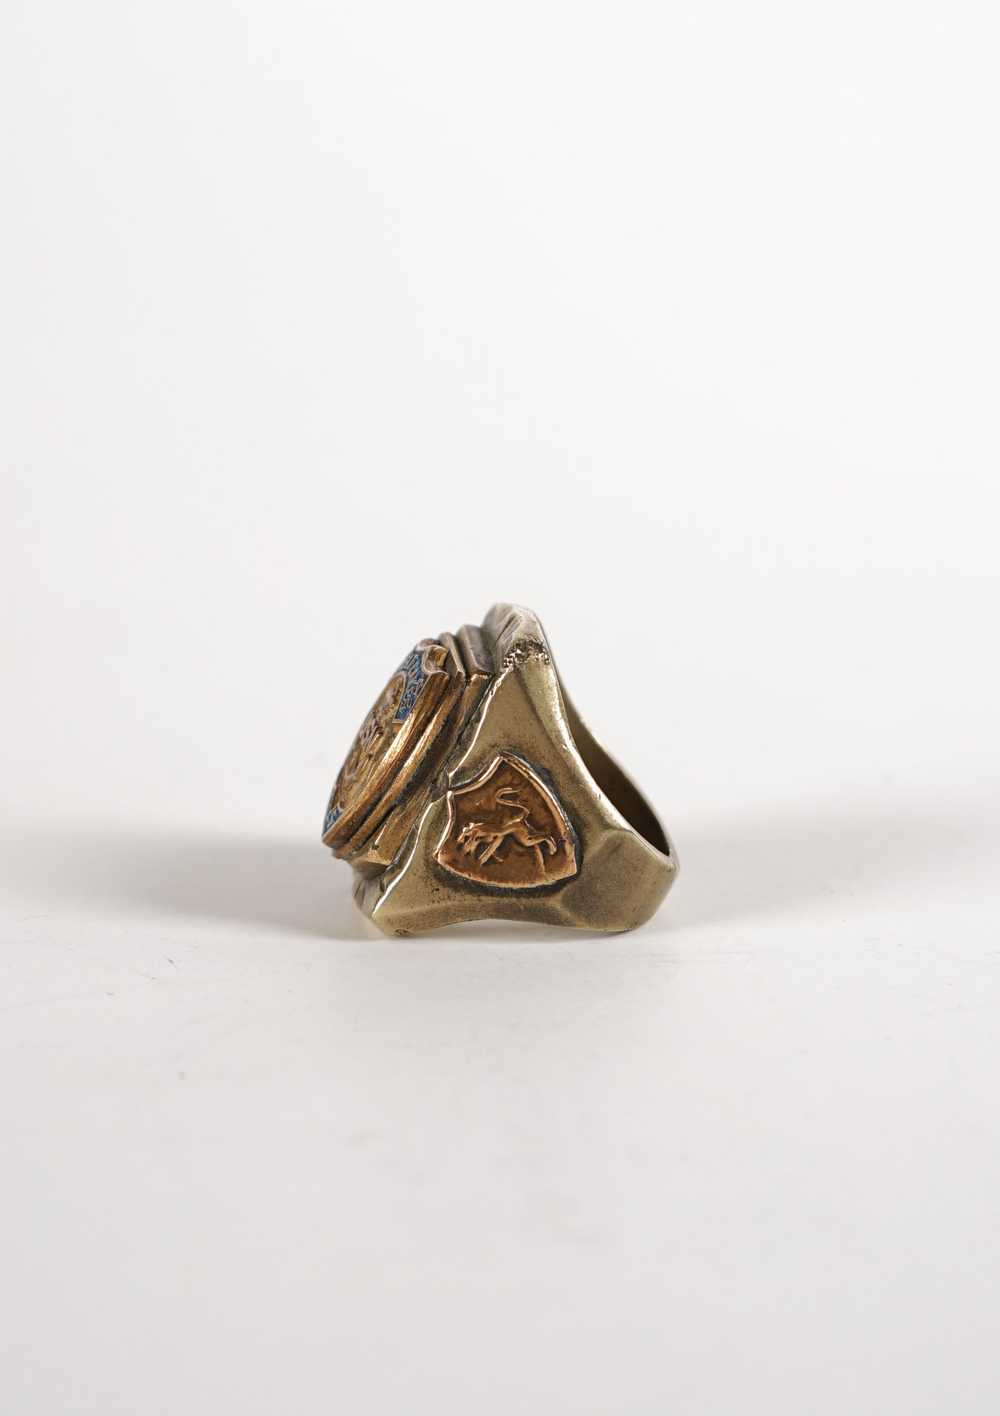 Mexican Biker Ring - image 3